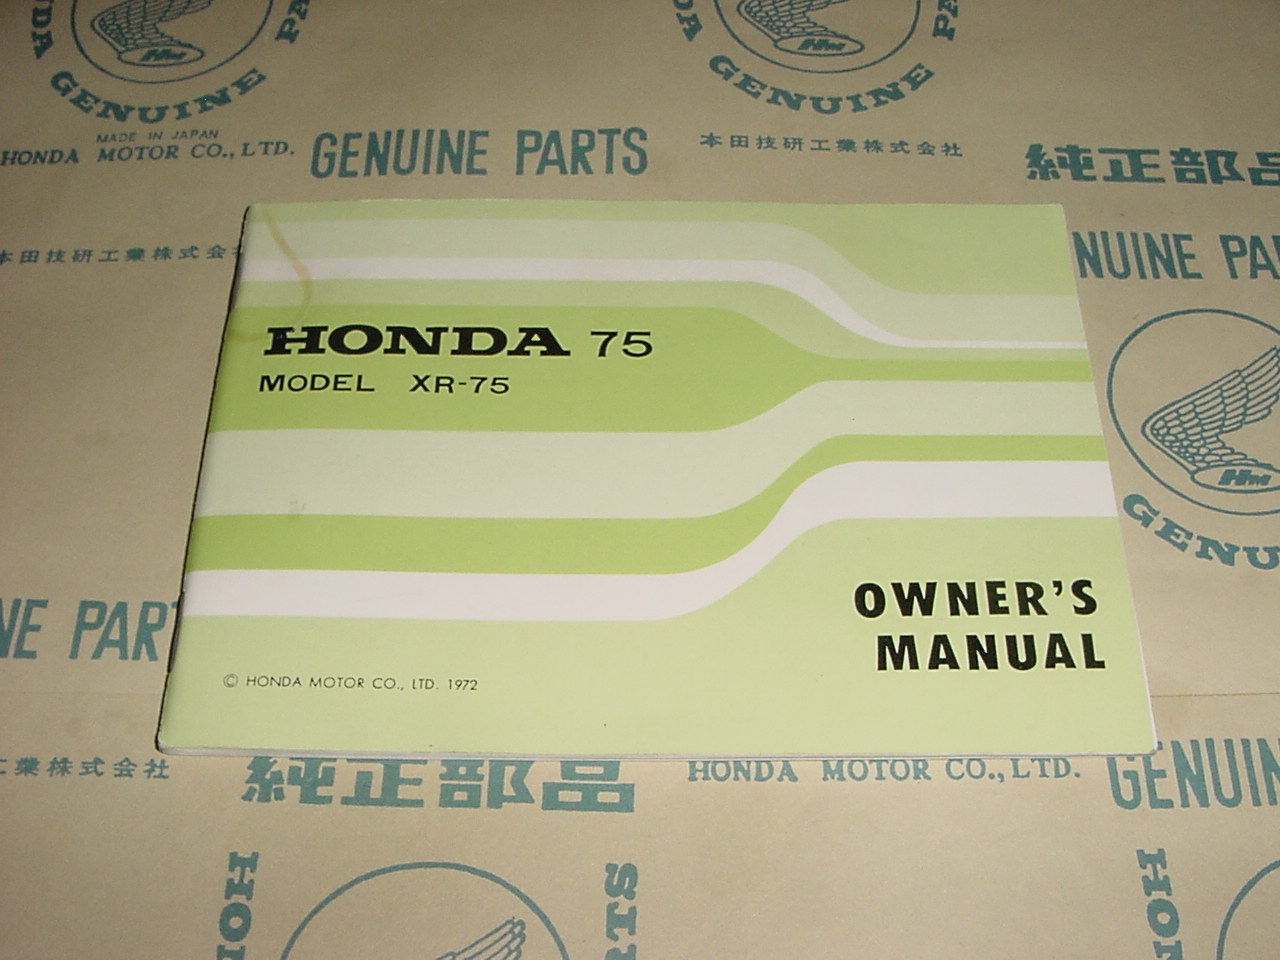 OM3111601 | This is a Honda NOS 1973 XR75 Hand book / Owner's Manual. 
The date on the front cover is 1972. The upper left hand corner has a water stain on it. This item has never been used and is very nice NOS shape!